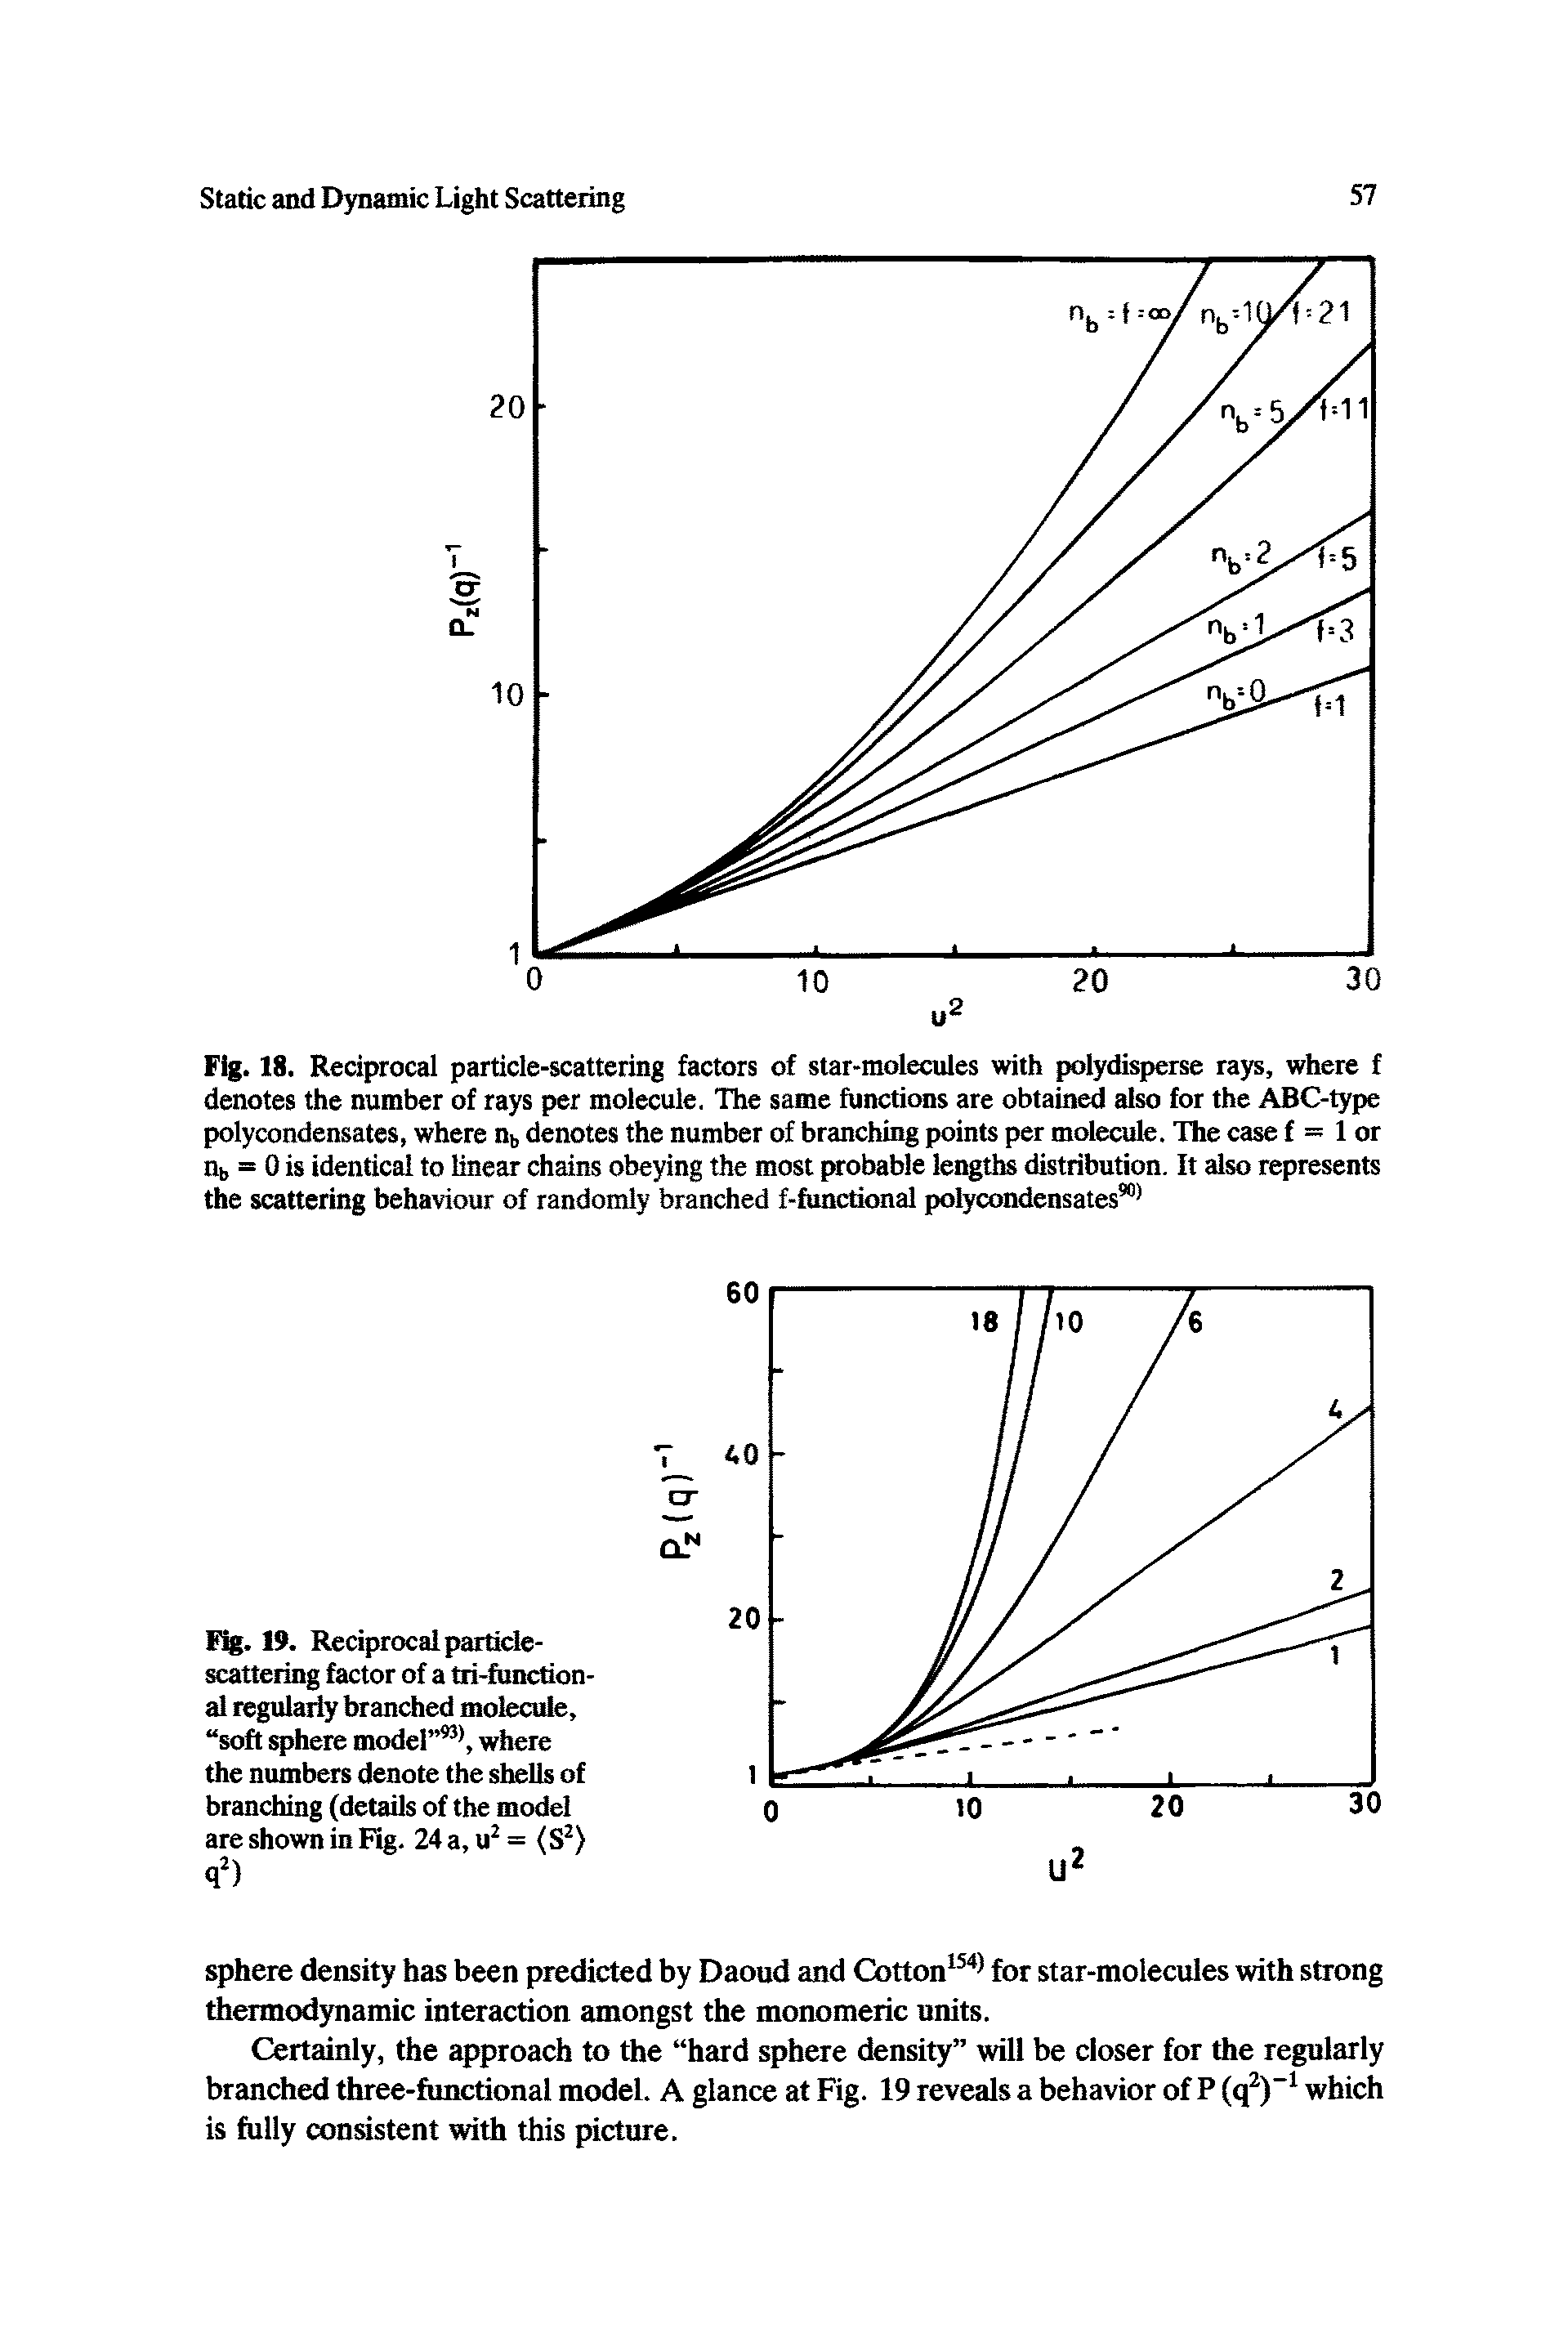 Fig. 18. Reciprocal particle-scattering factors of star-molecules with polydisperse rays, where f denotes the number of rays per molecule. The same functions are obtained also for the ABC-type polycondensates, where nb denotes the number of branching points per molecule. The case f = 1 or nb = 0 is identical to linear chains obeying the most probable lengths distribution. It also represents the scattering behaviour of randomly branched f-functional polycondensates 1...